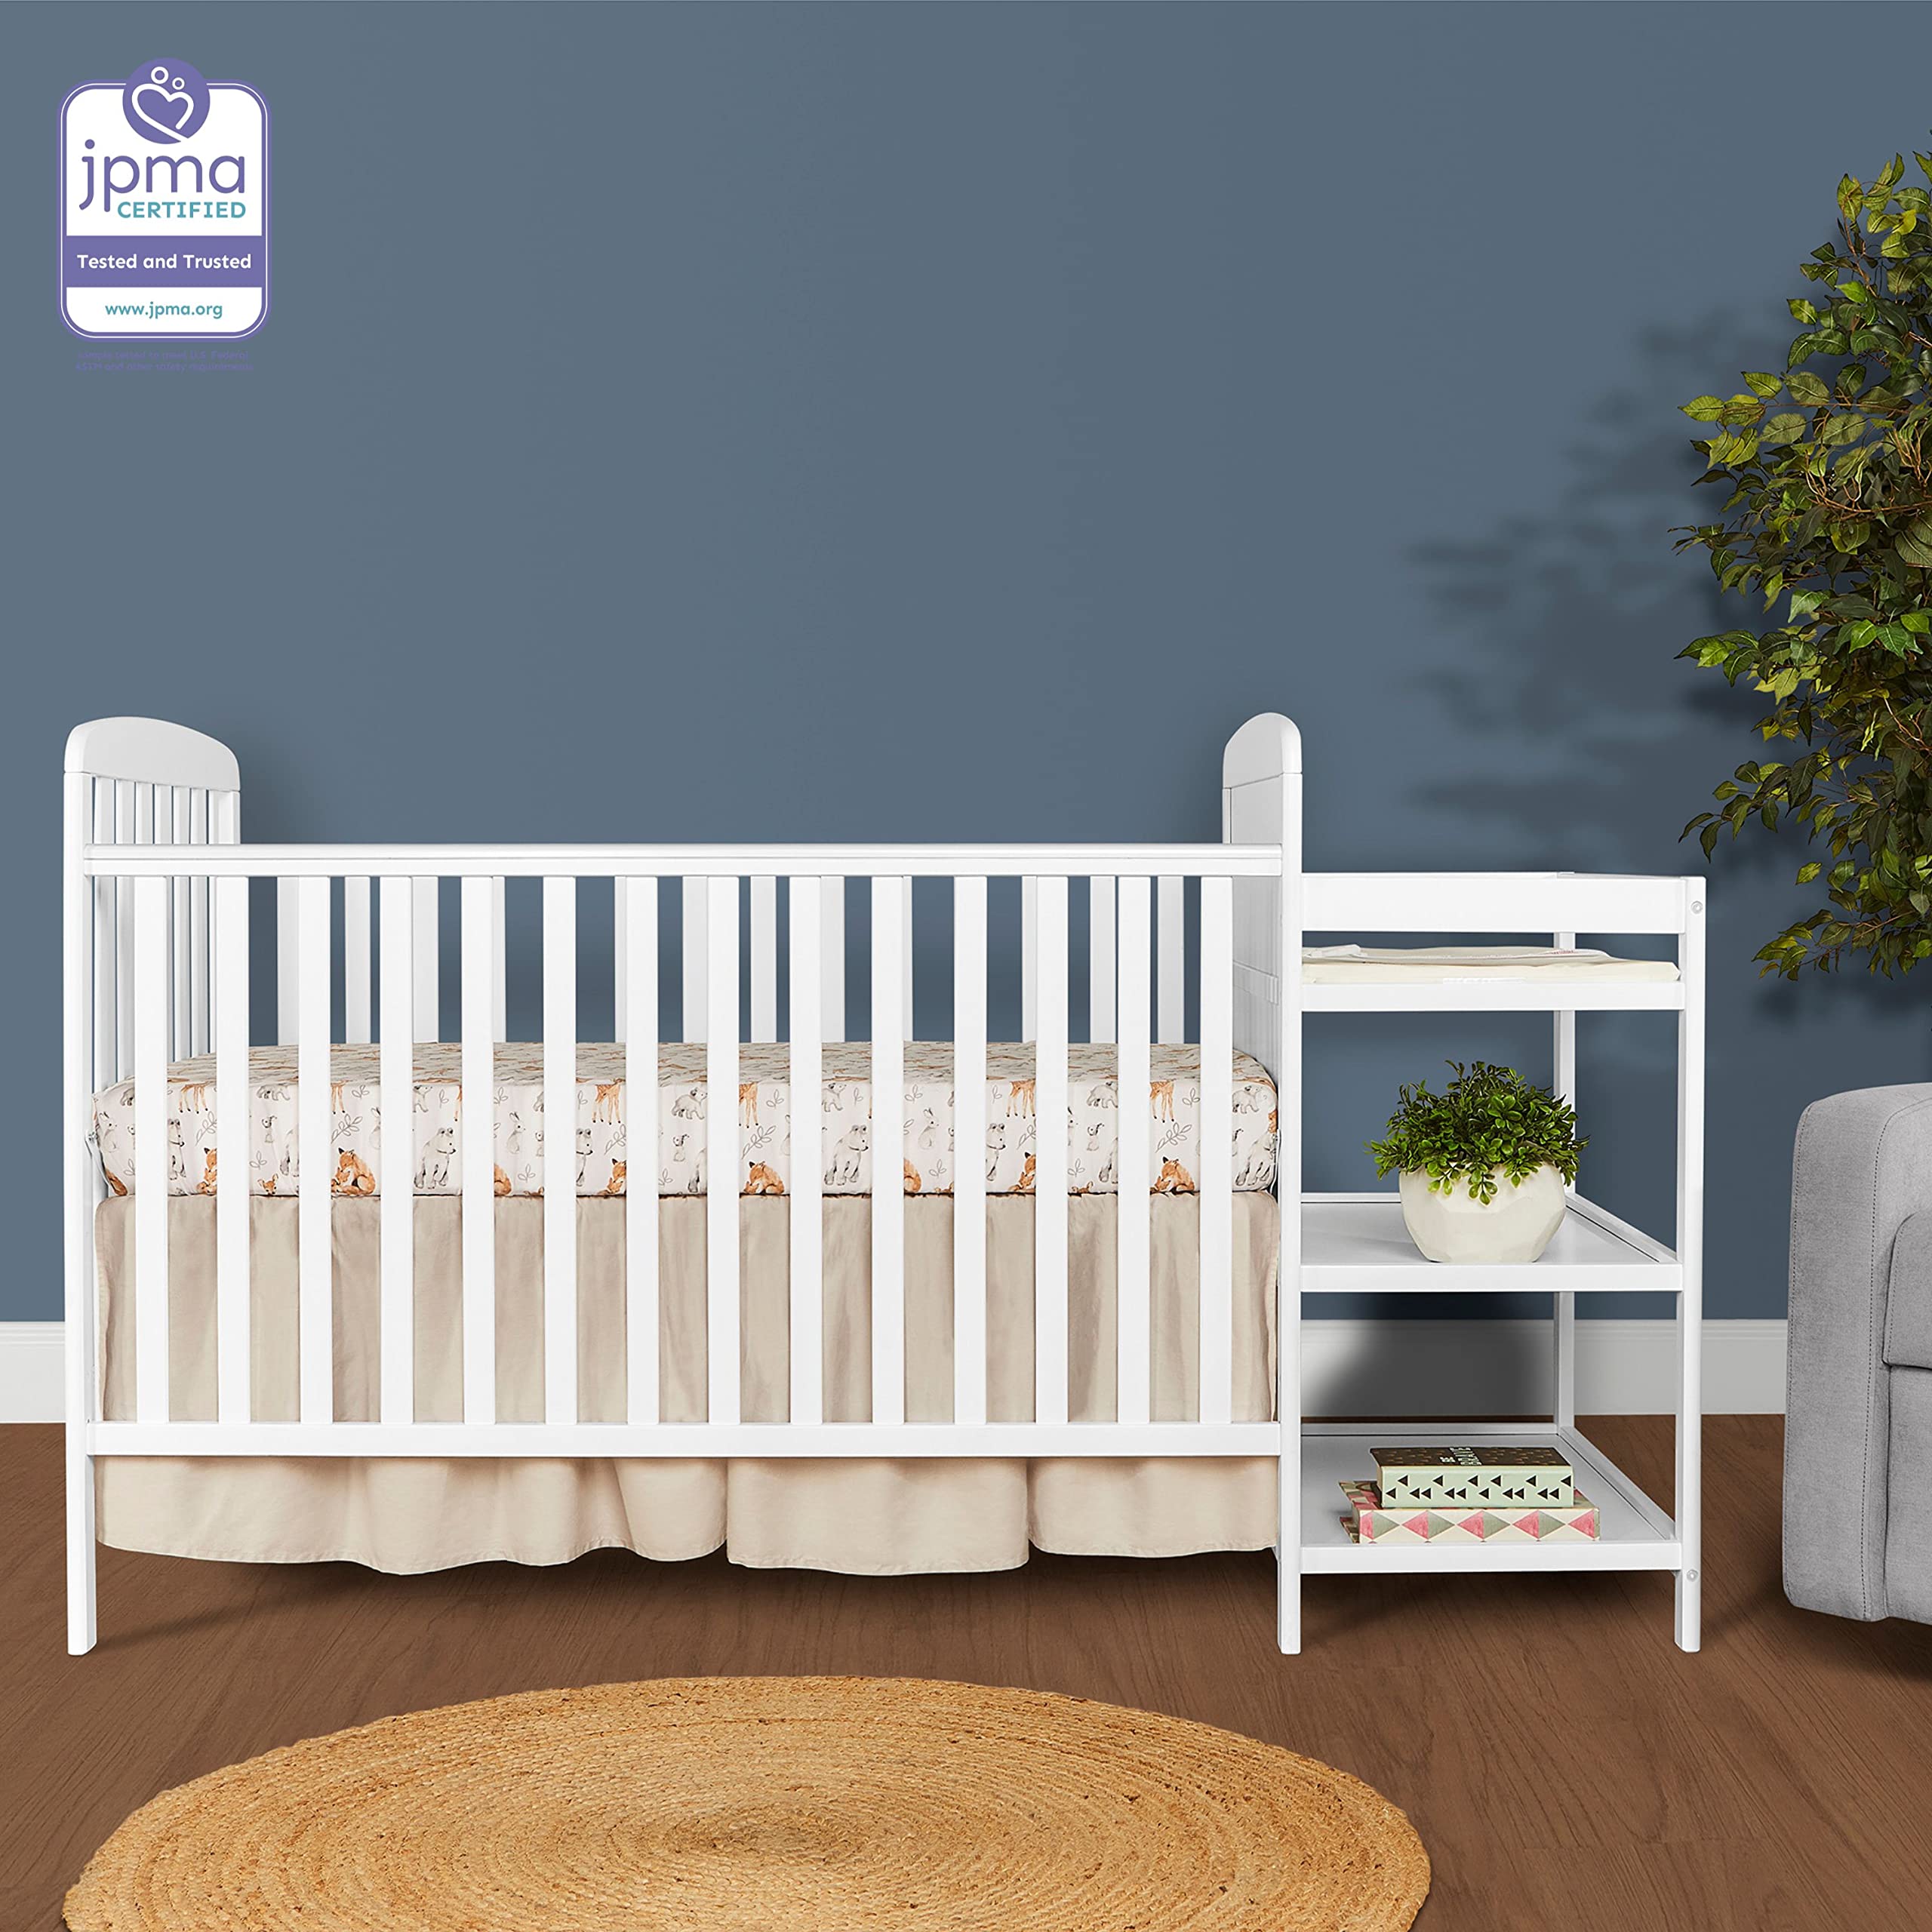 Dream On Me Anna 4-In-1 Full-Size Crib And Changing Table Combo In White